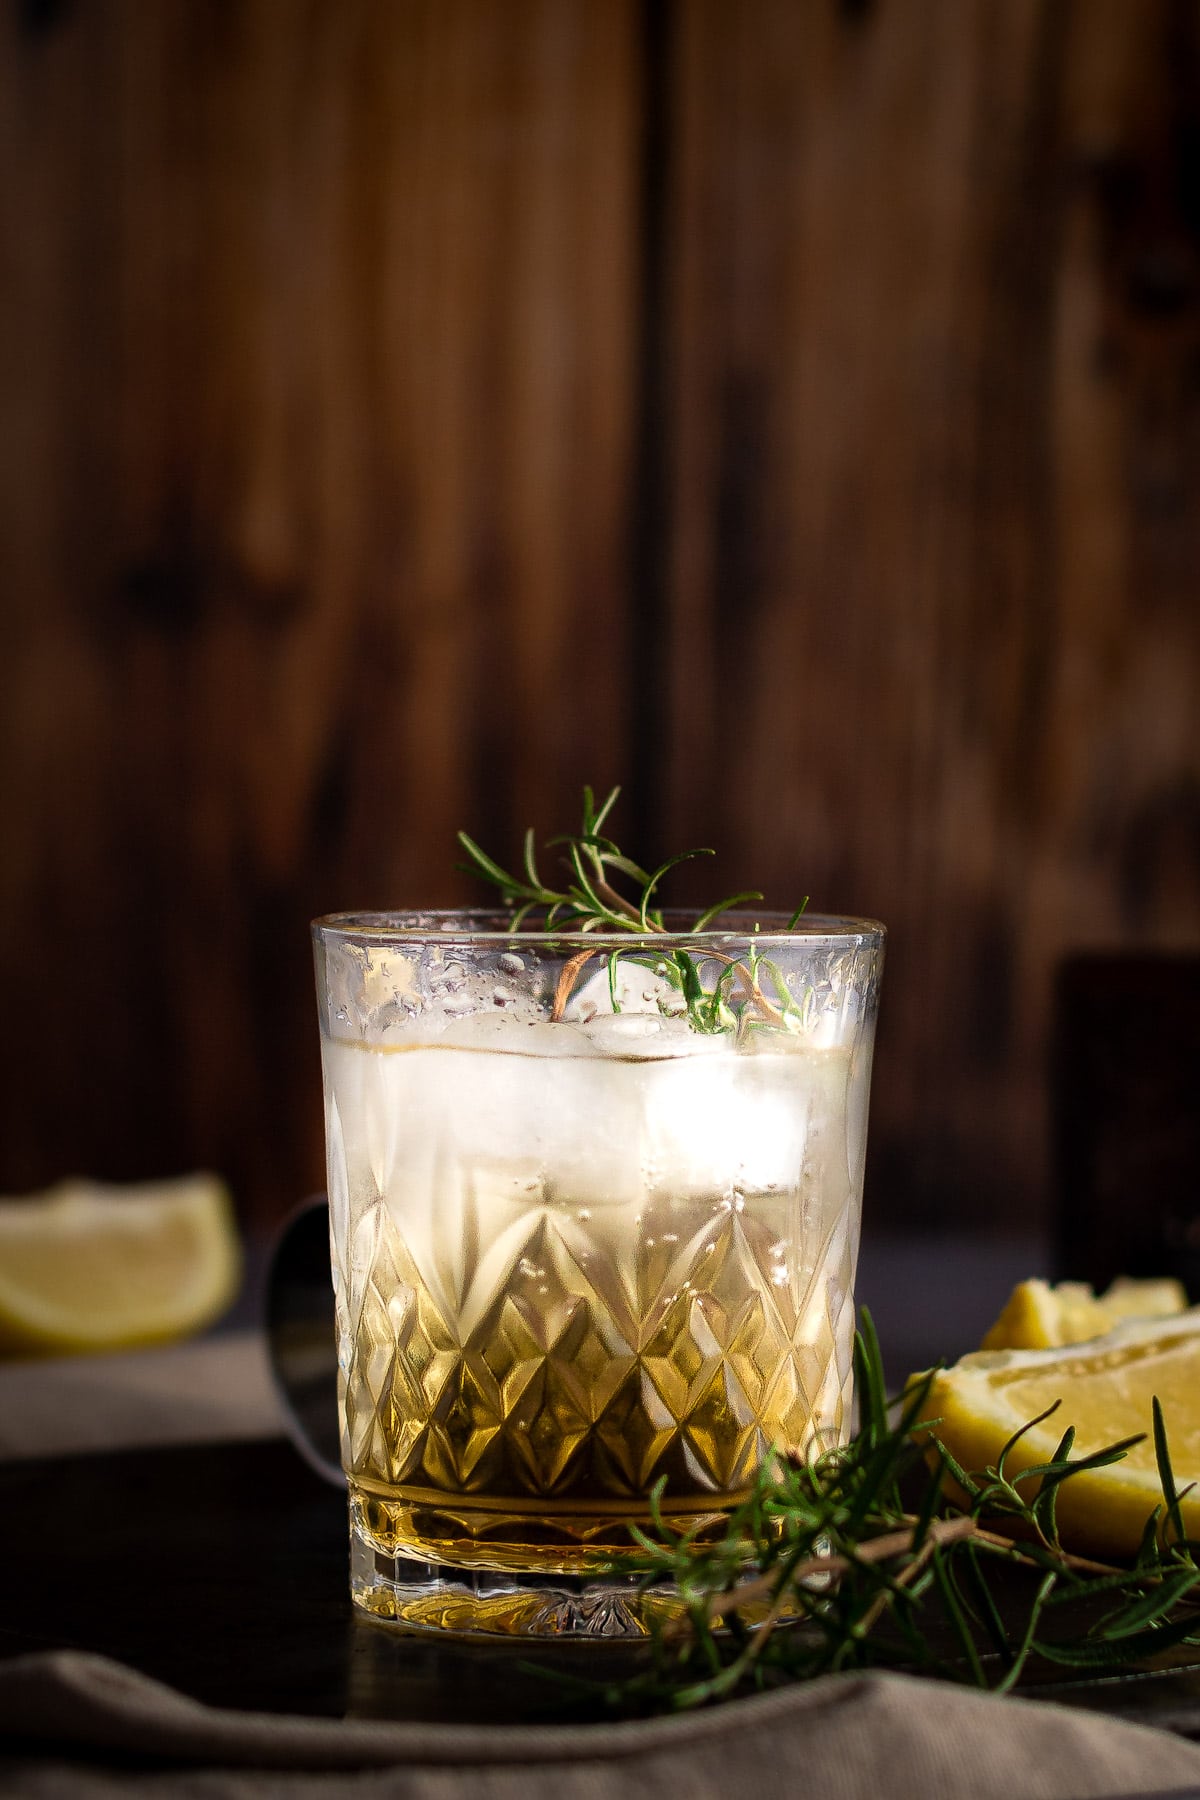 A golden bourbon rosemary cocktail, garnished with rosemary, sitting on a dark metal tray, next to lemon slices with a wooden background.